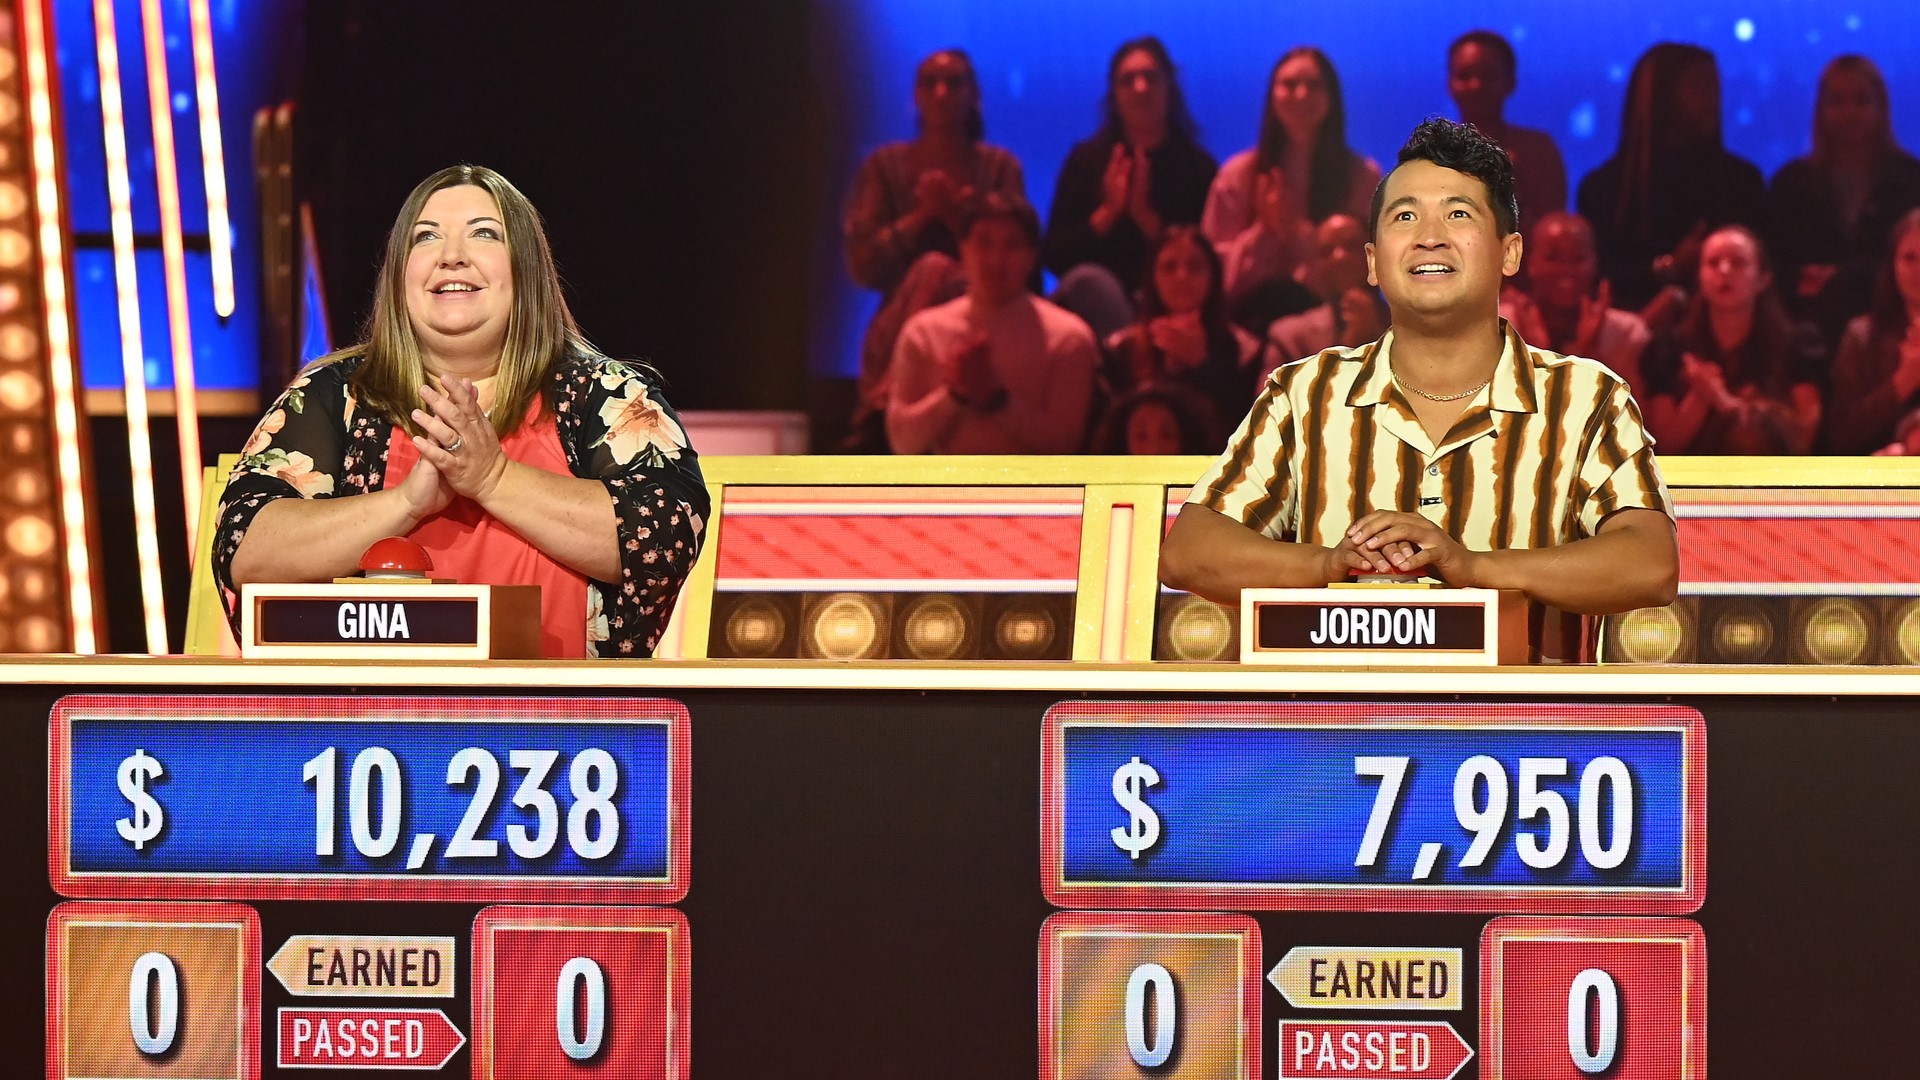 Gina Mertz from Roseville and Jordon Friend from Sacramento are joining a woman from Tacoma, Wash. as the three contestants in the season four premiere.